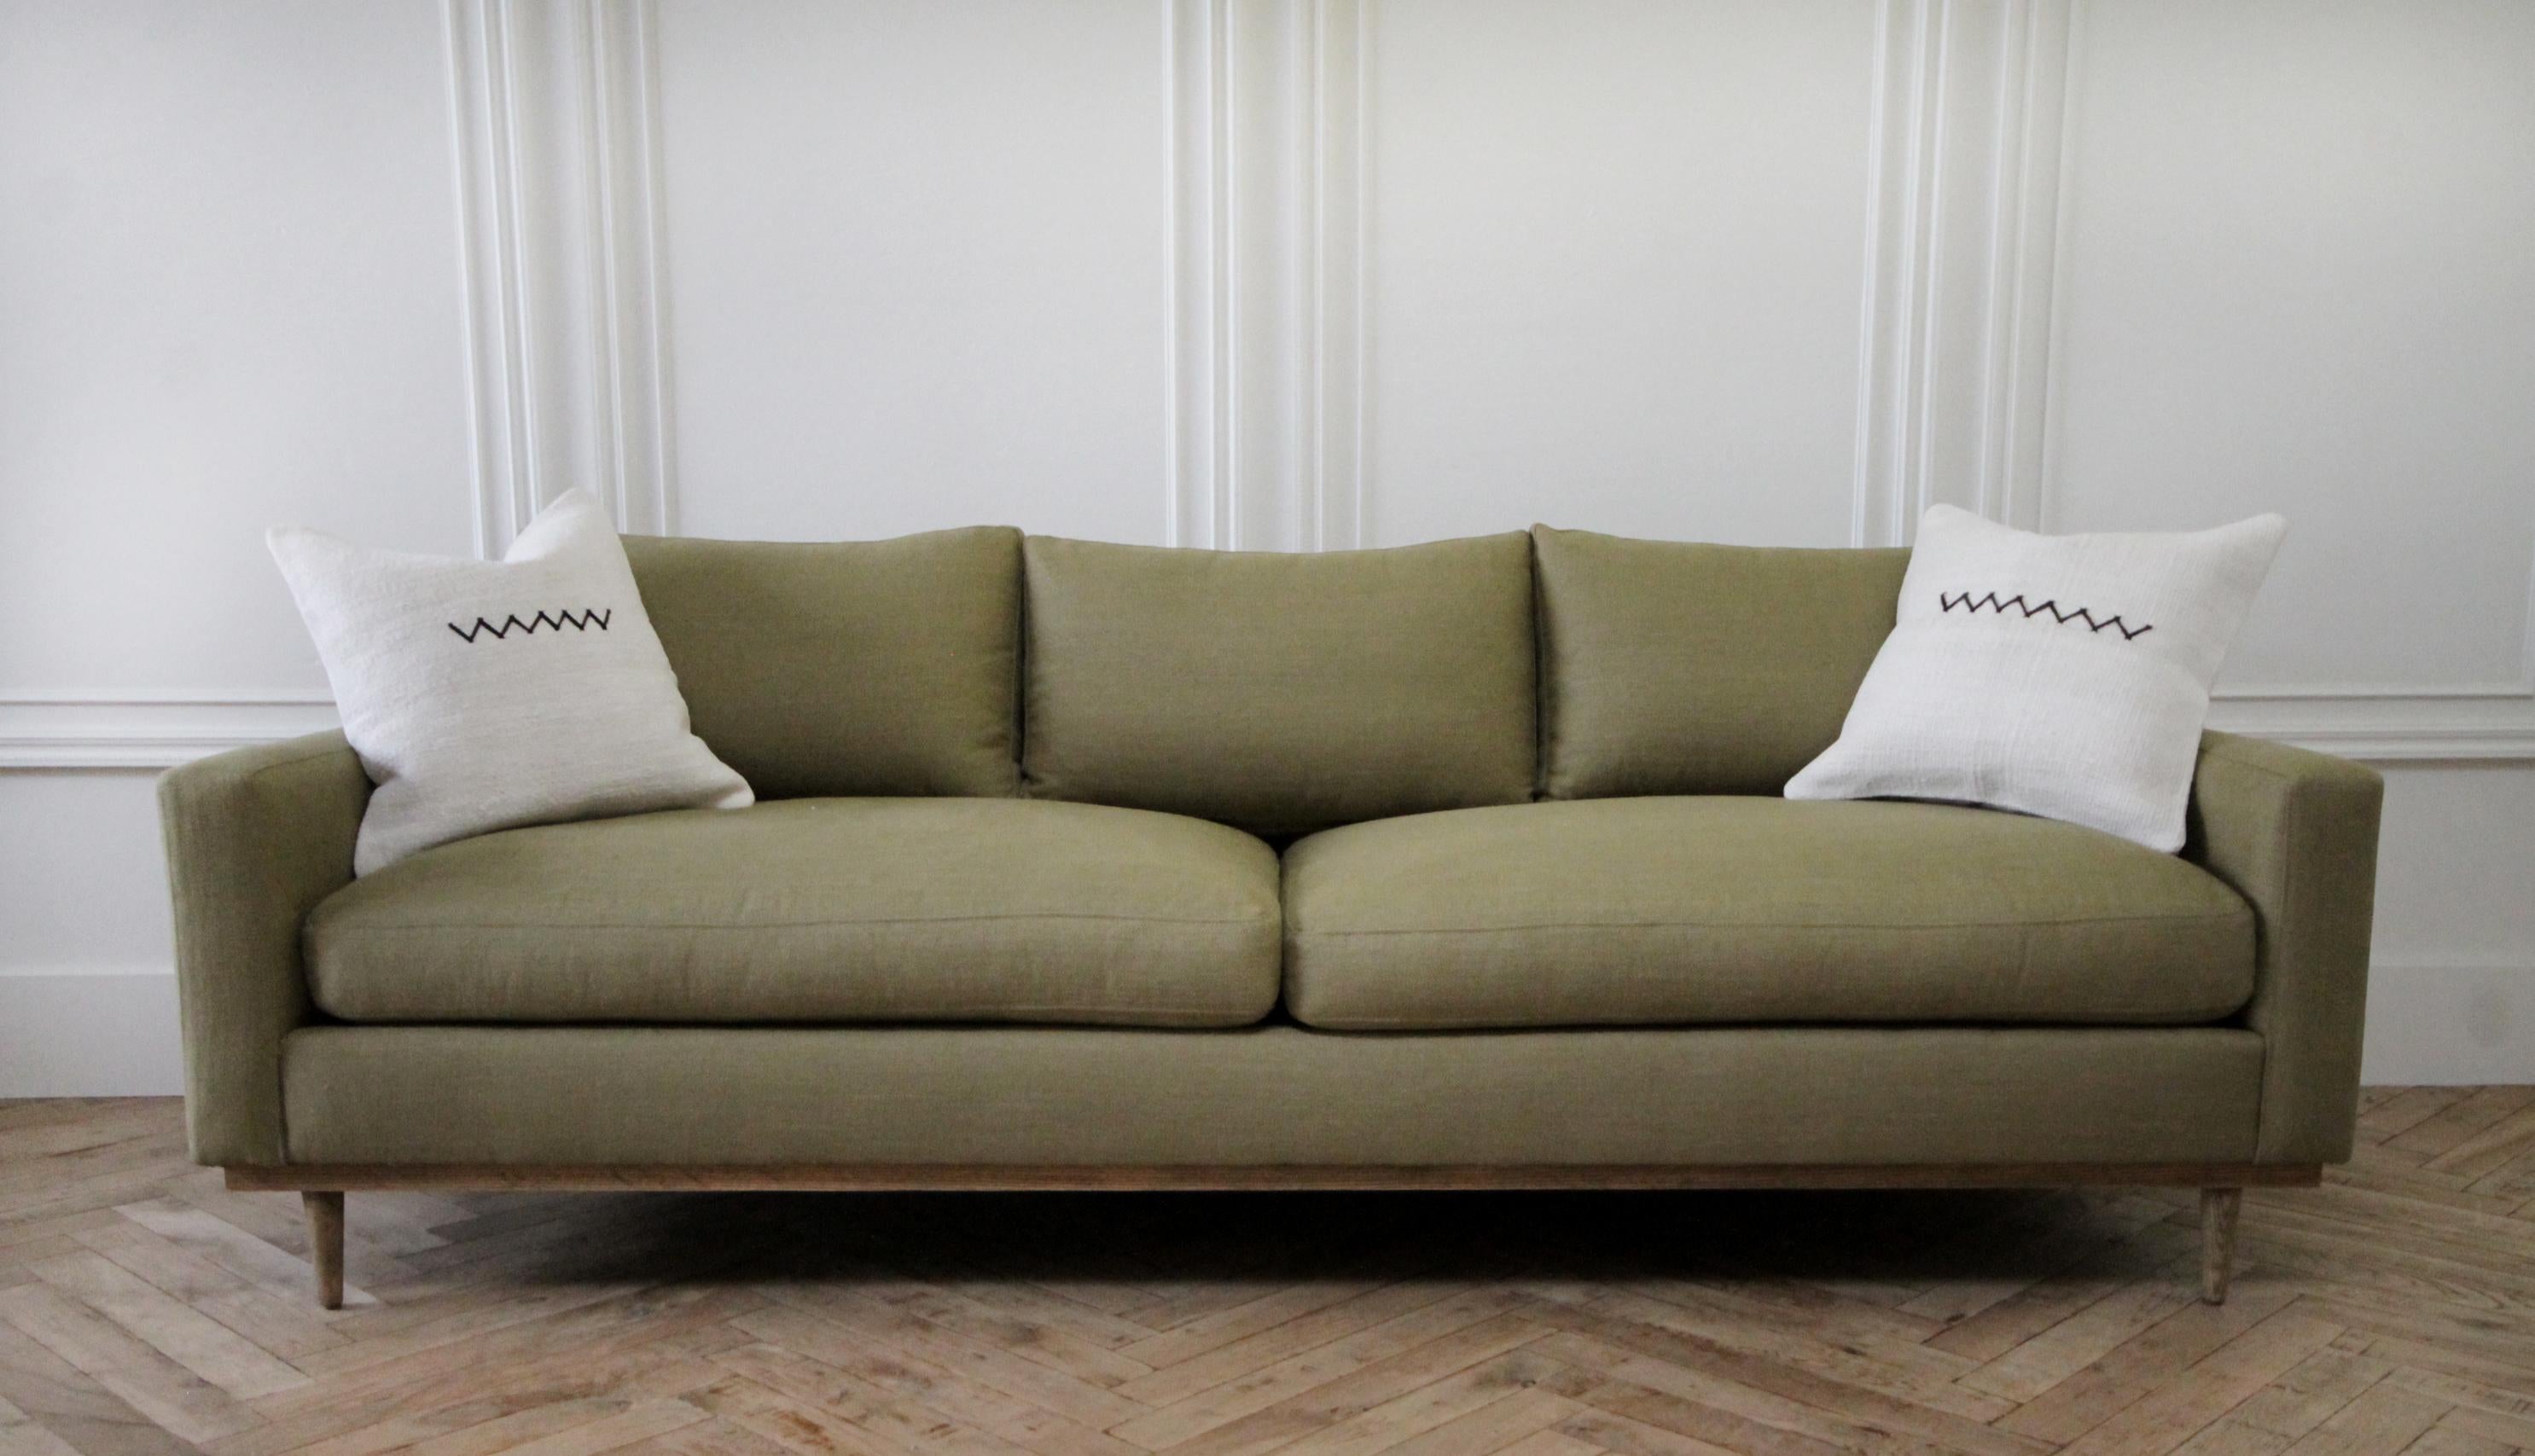 American Vintage Modern Style Sofa with Down Cushions